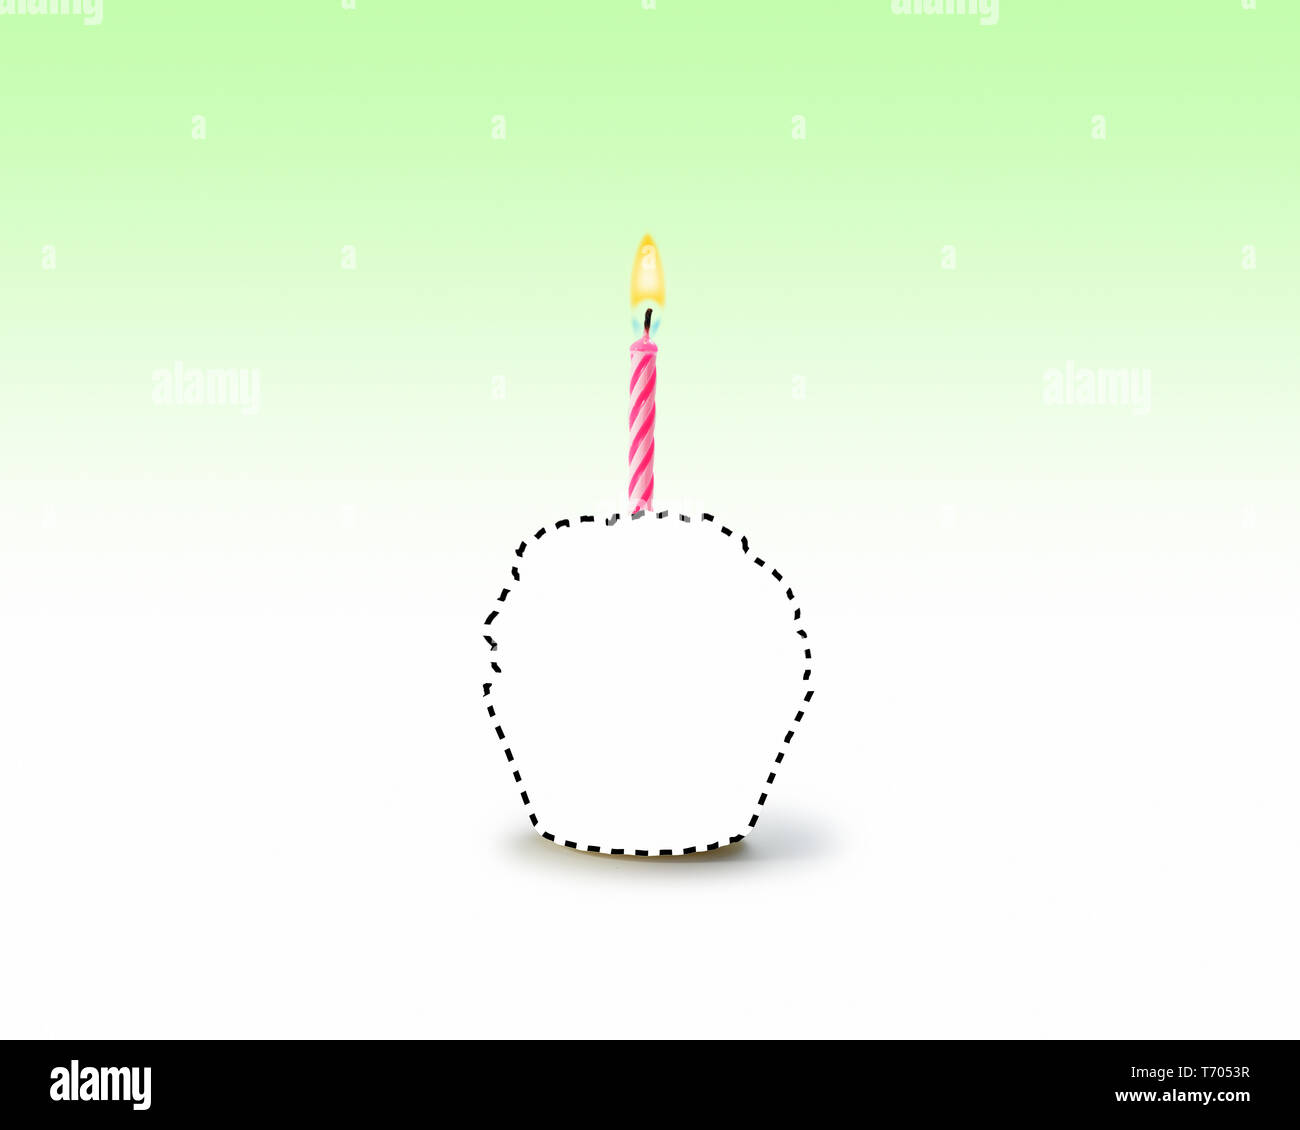 Concept Conceptual Dashed, Missing Birthday cupcake and a lit candle on a Green Background Stock Photo